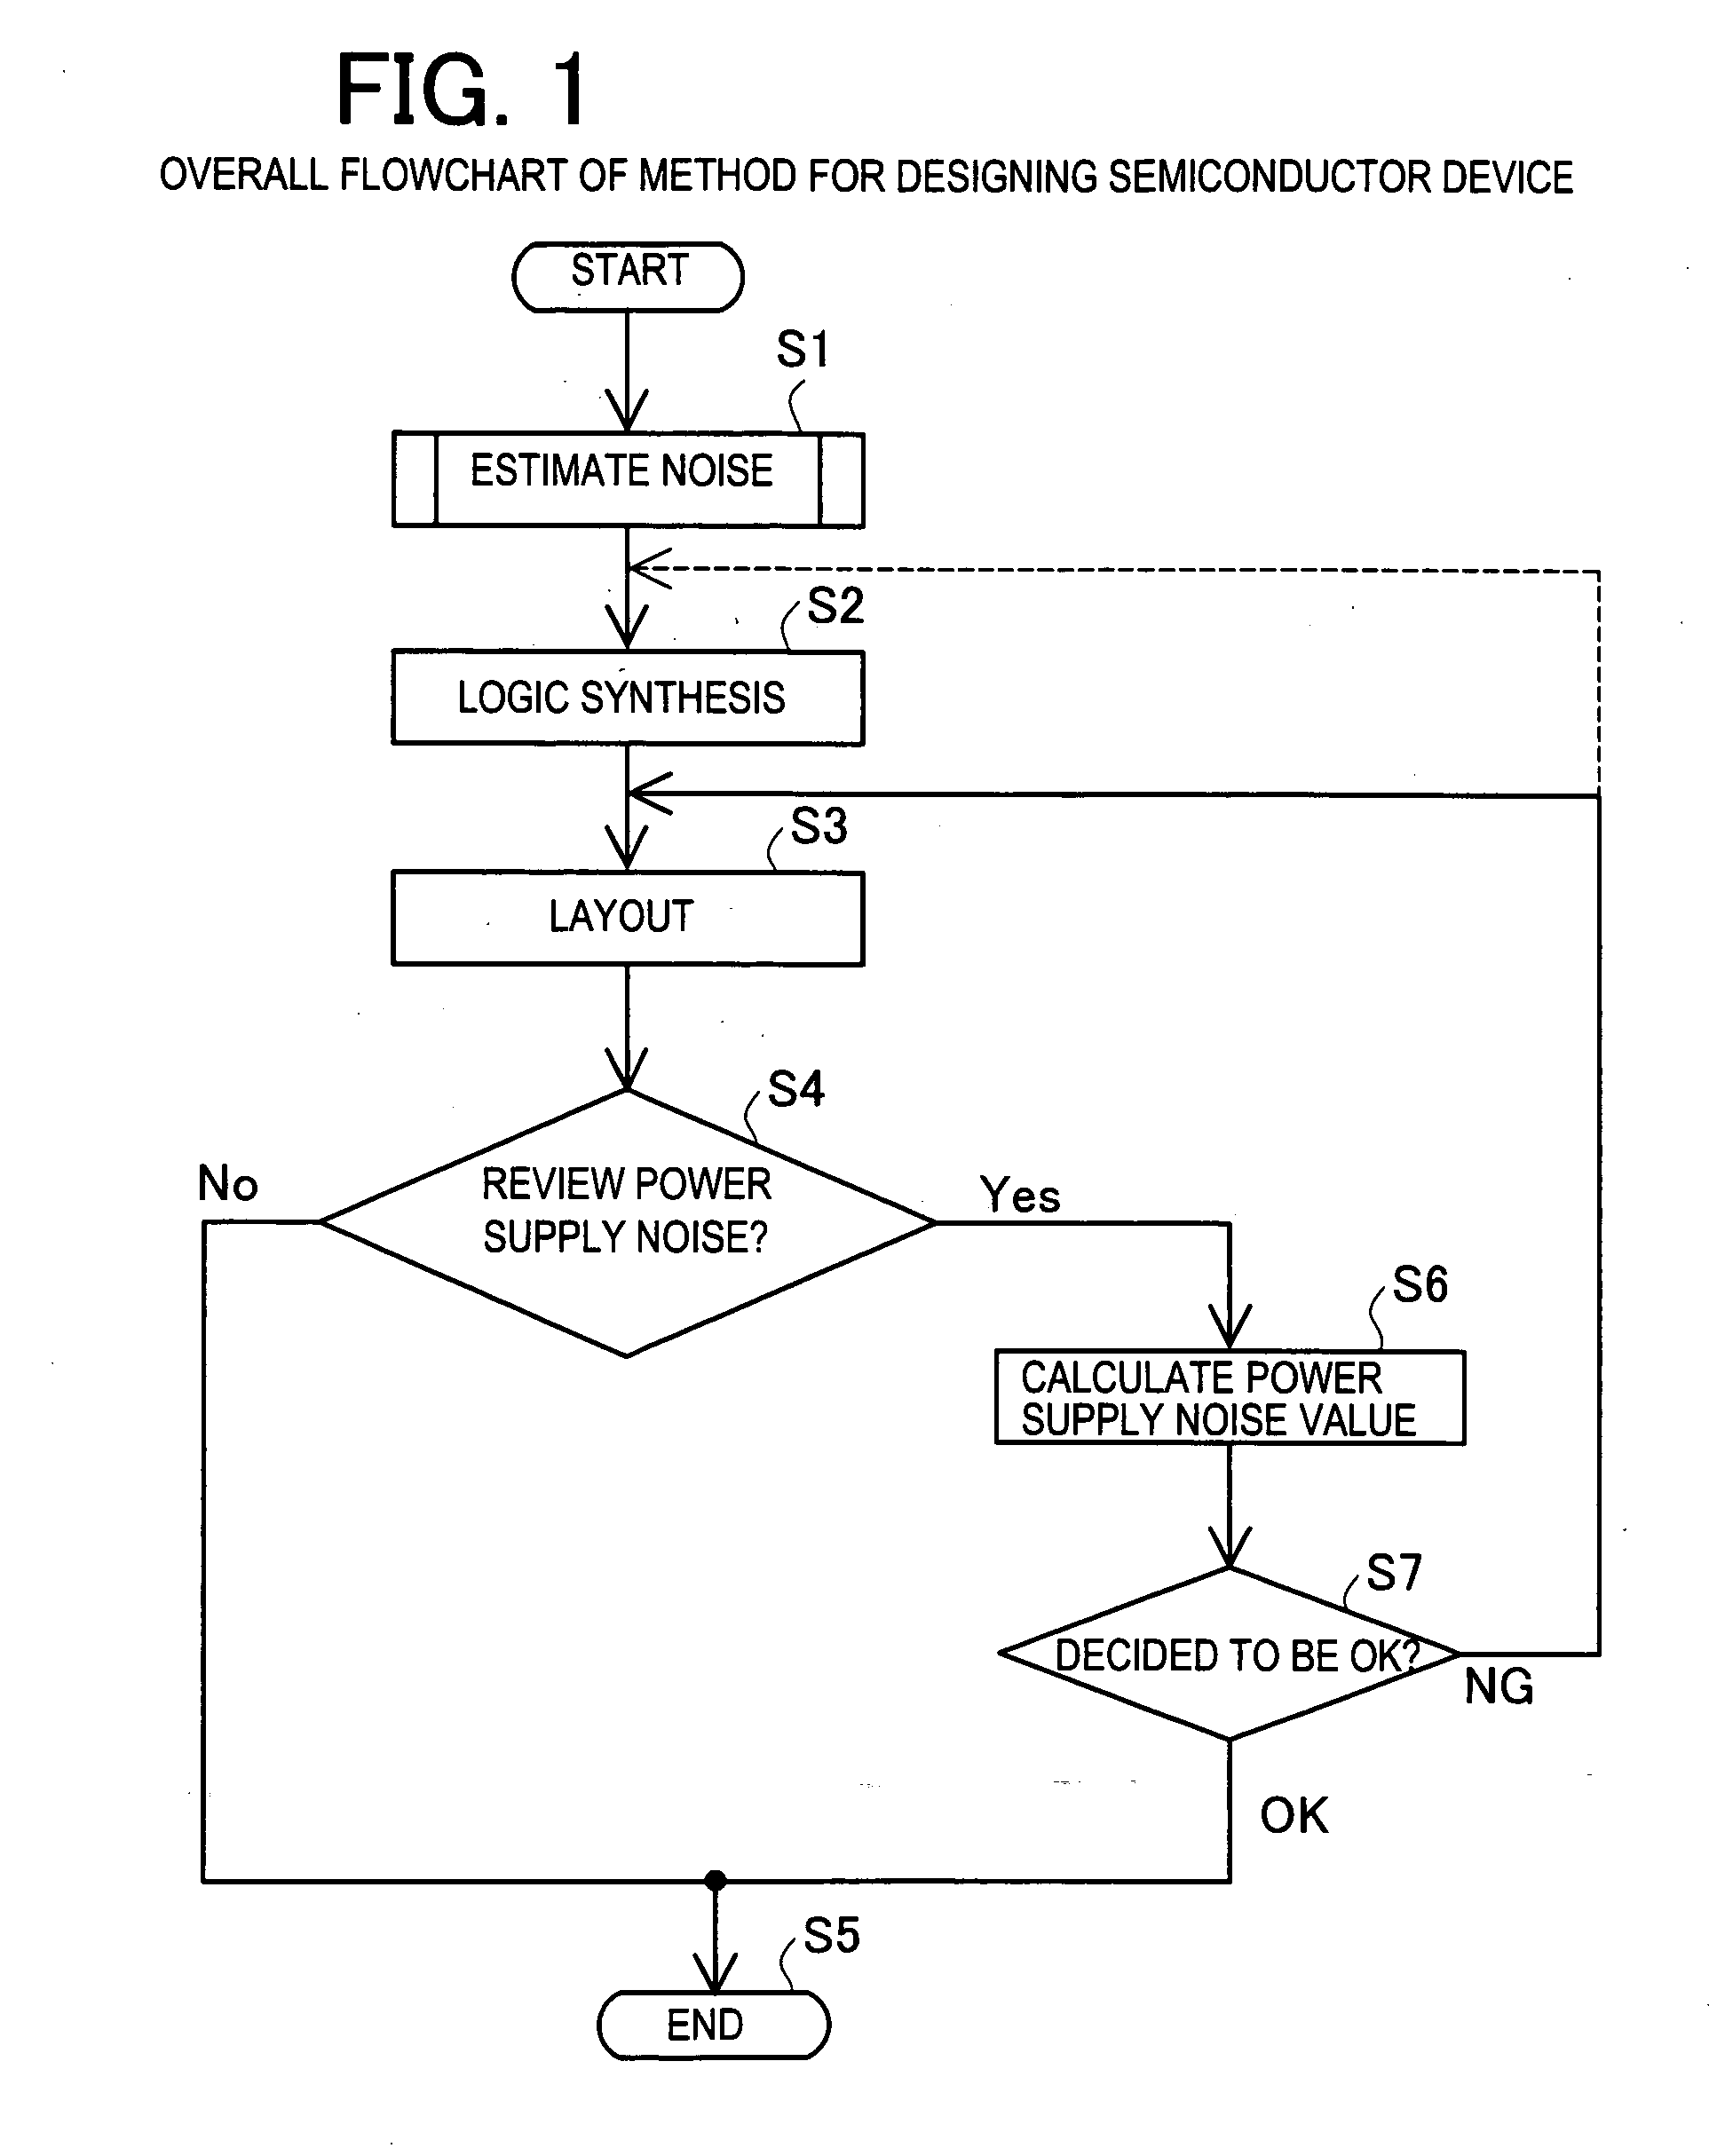 Method and program for designing semiconductor device